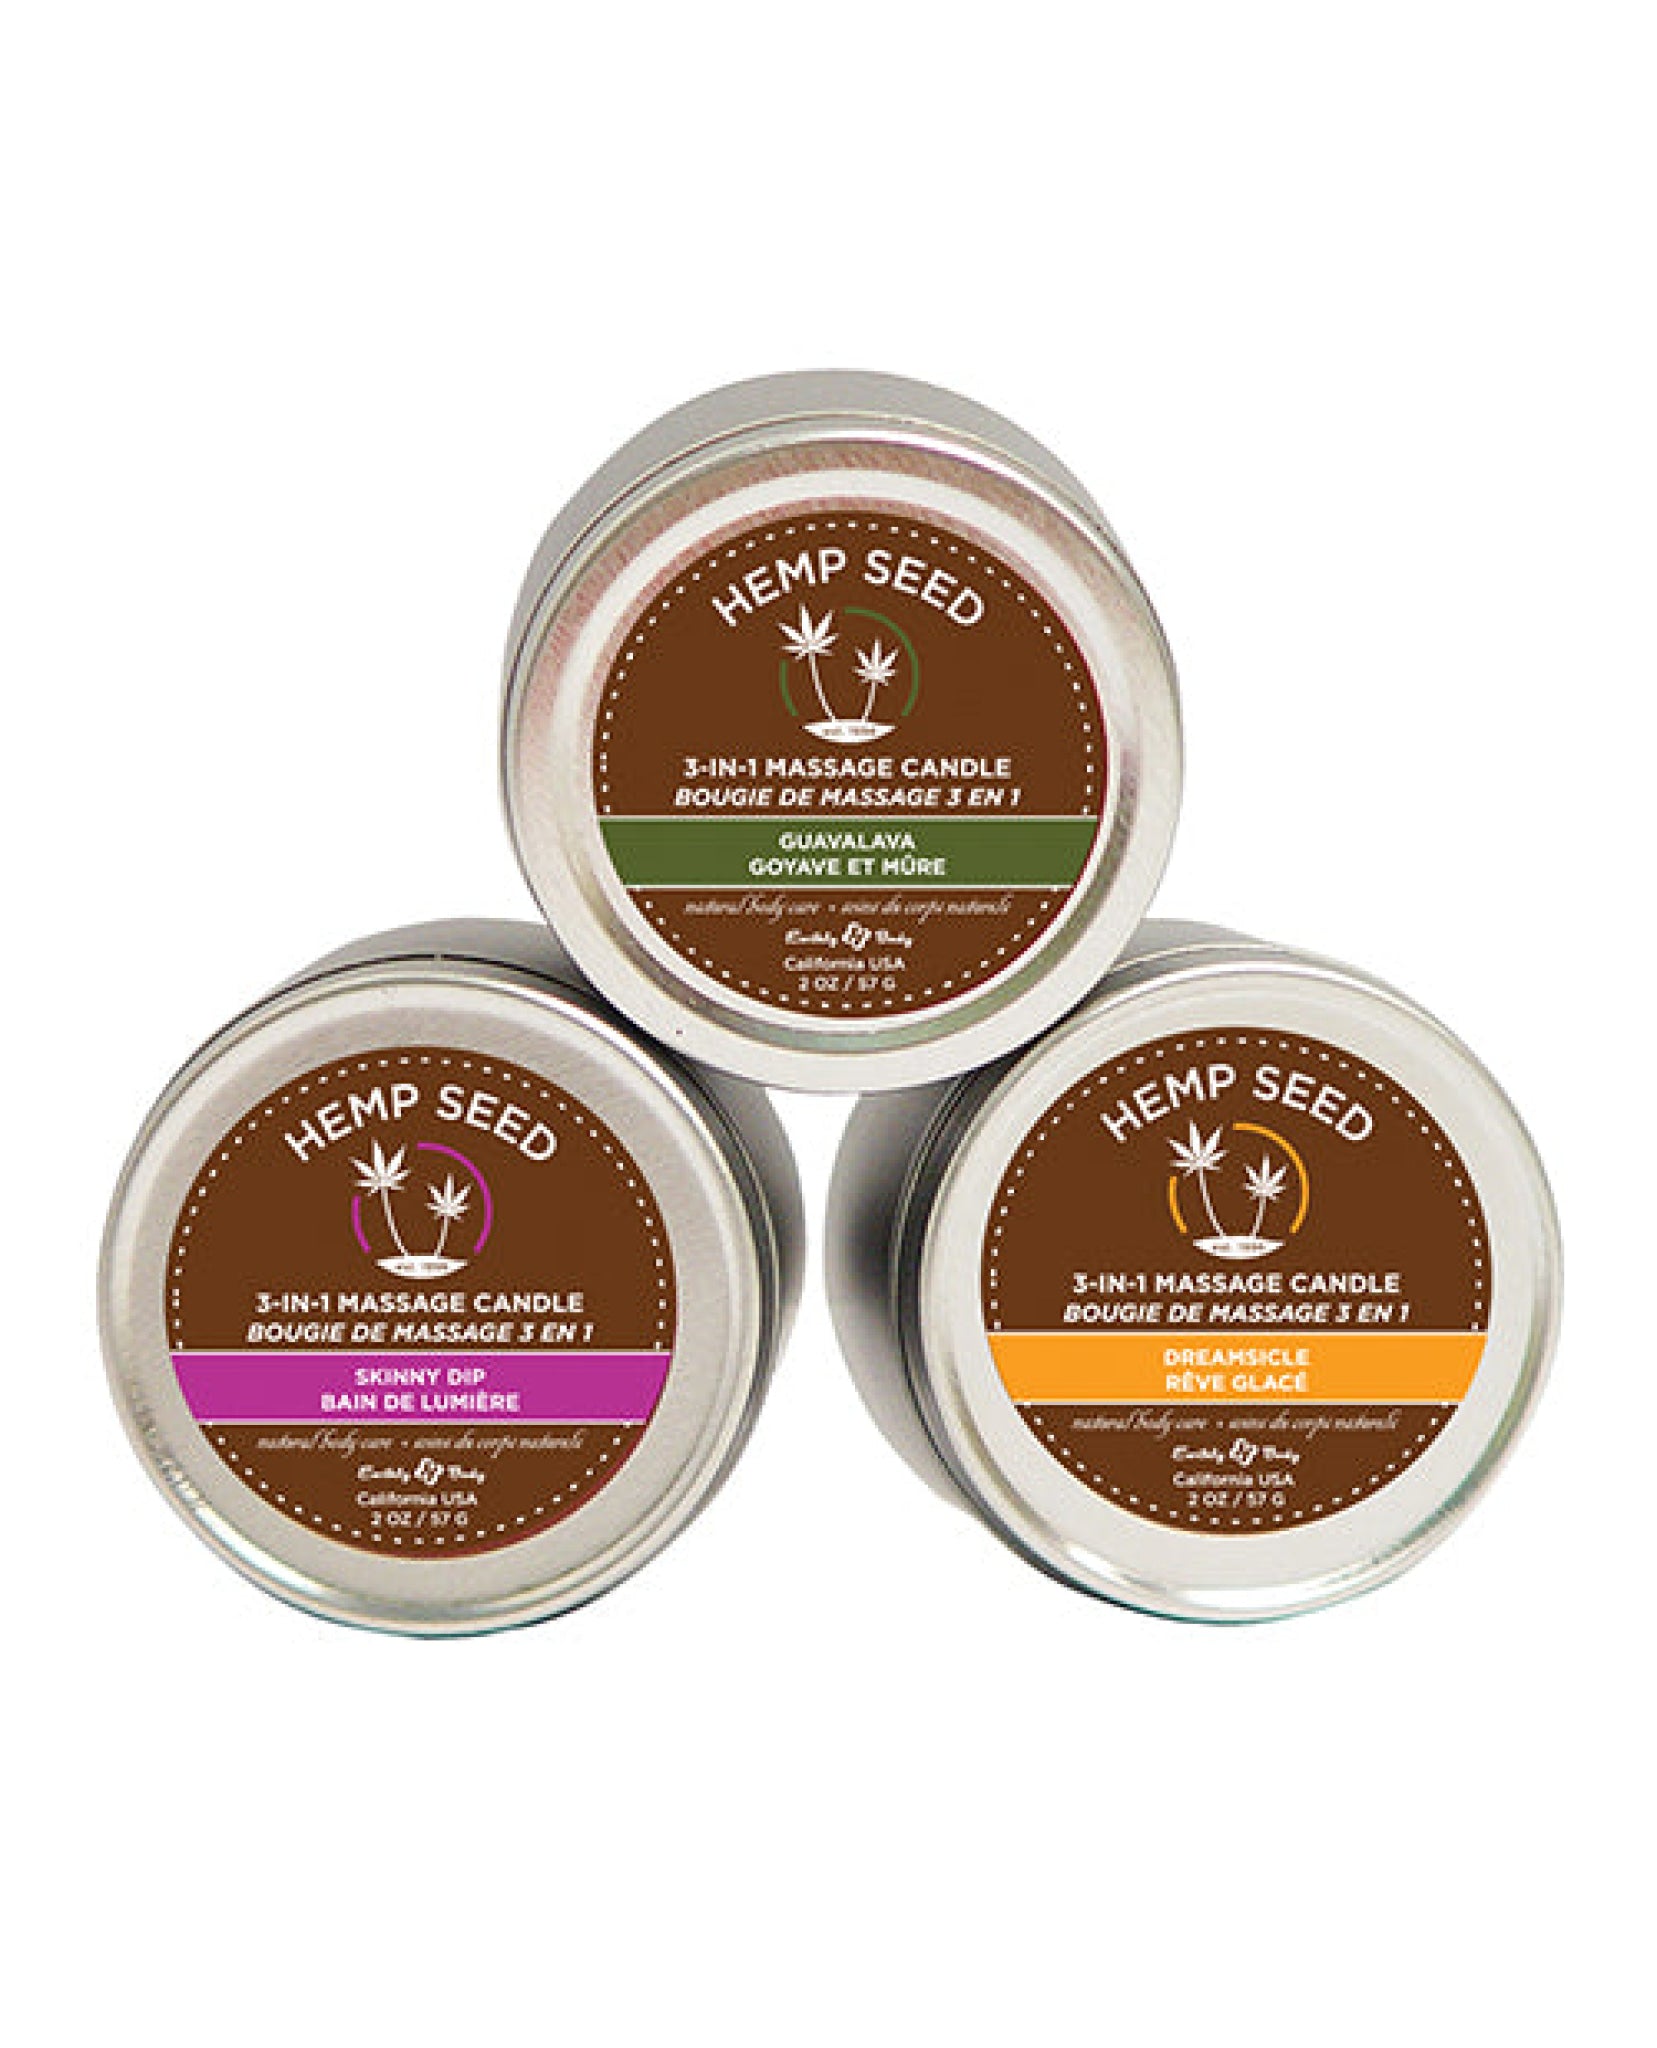 Earthly Body Massage Candle Trio Gift Bag - 2 Oz Skinny Dip, Dreamsicle, & Guavalva Earthly Body